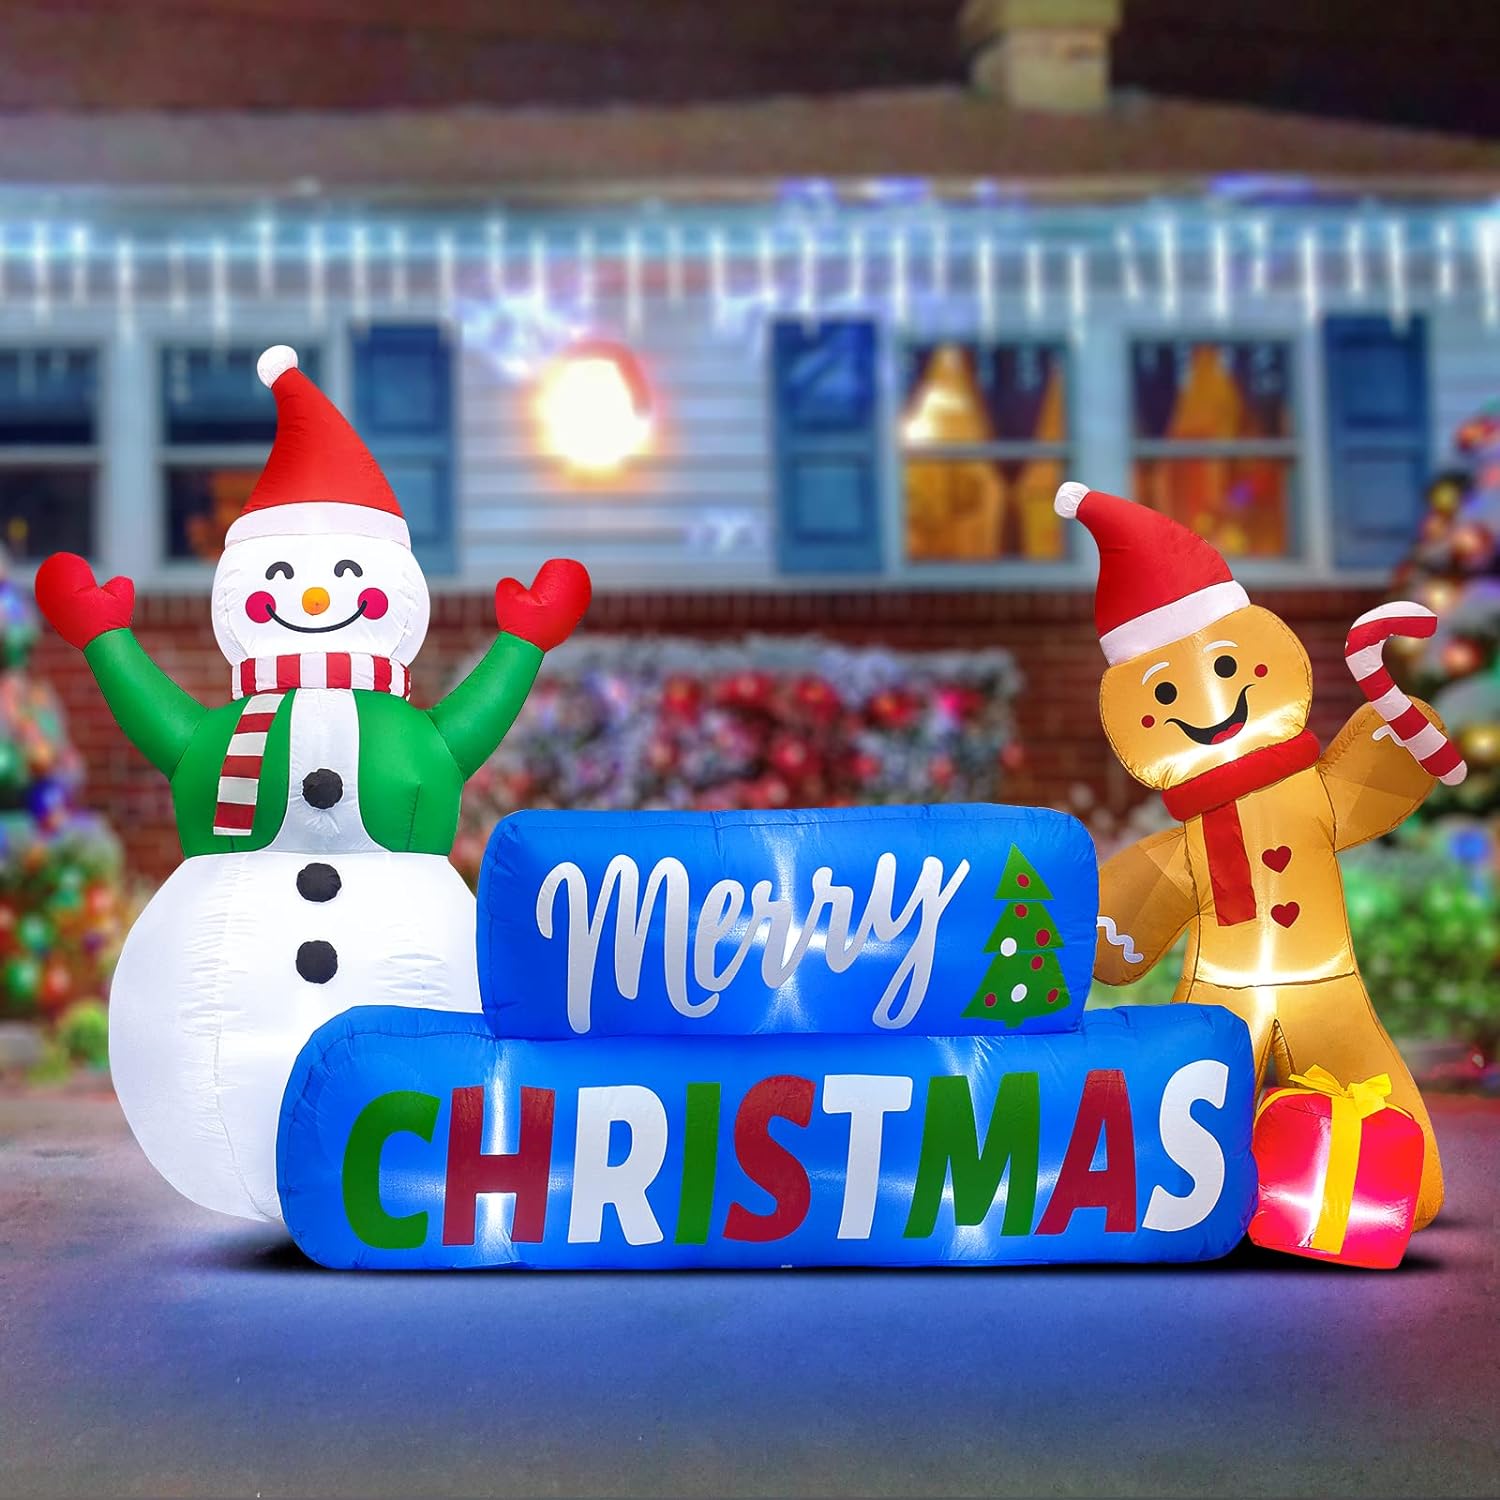 COOBILY 9FT Long Merry Christmas Banner Outdoor Inflatables Decorations with LED Lights, Happy Snowman Inflatable Gingerbread Man Gift Box Decoration Blow Ups Yard Holiday Xmas Party Decor